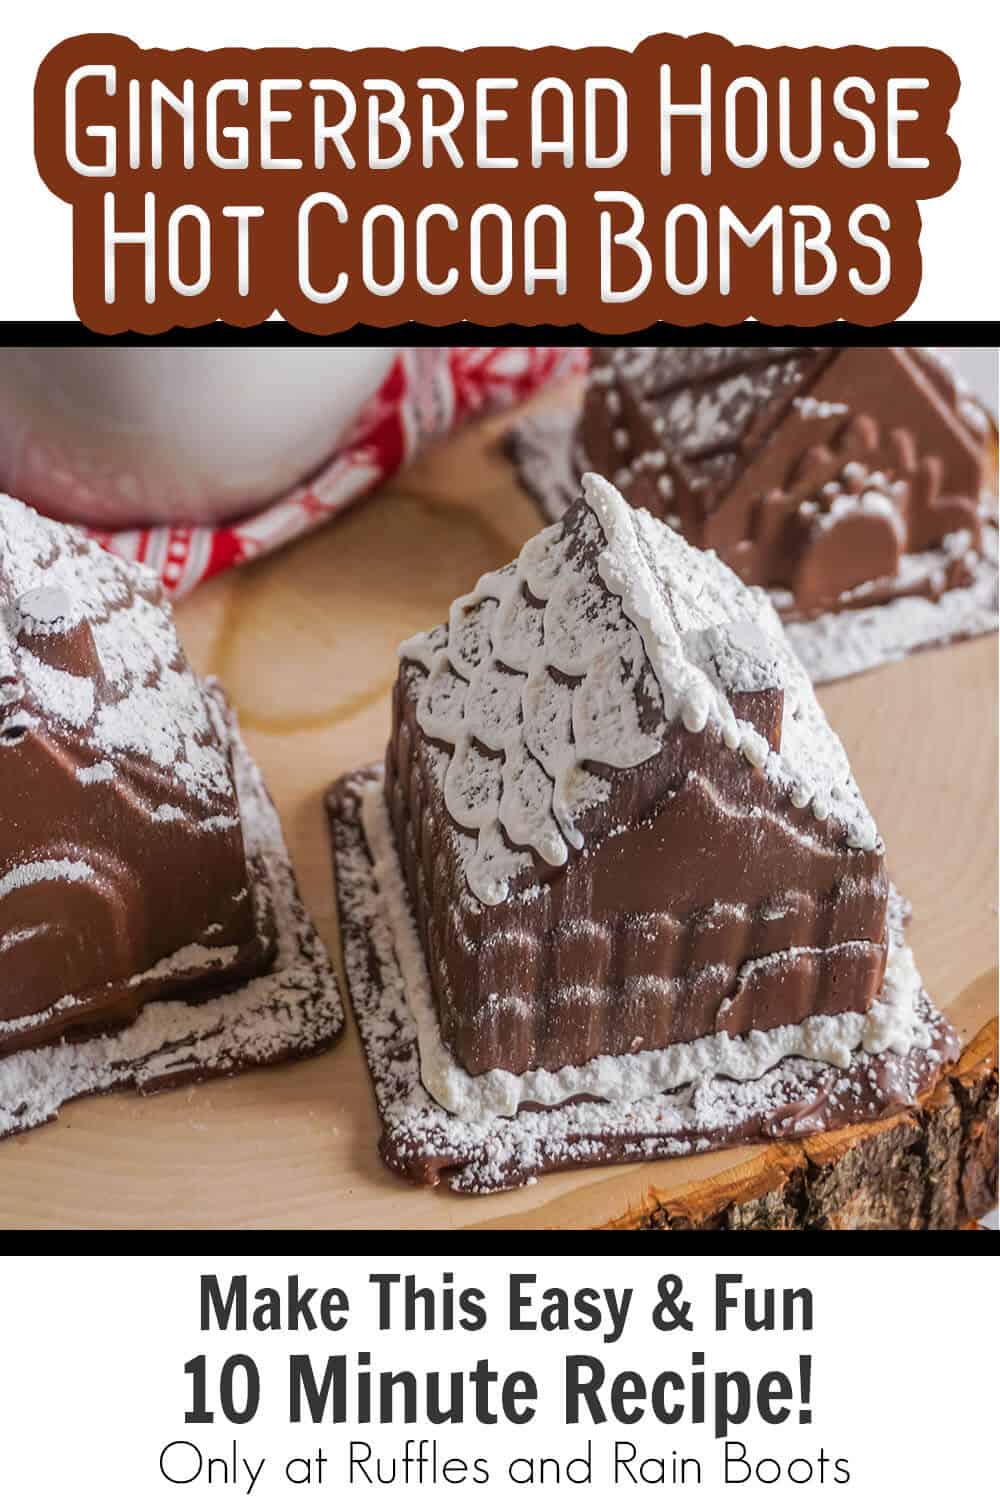 Chocolate Gingerbread House Hot Cocoa Bombs with text which reads gingerbread house hot cocoa bombs make this easy & fun 10-minute recipe!